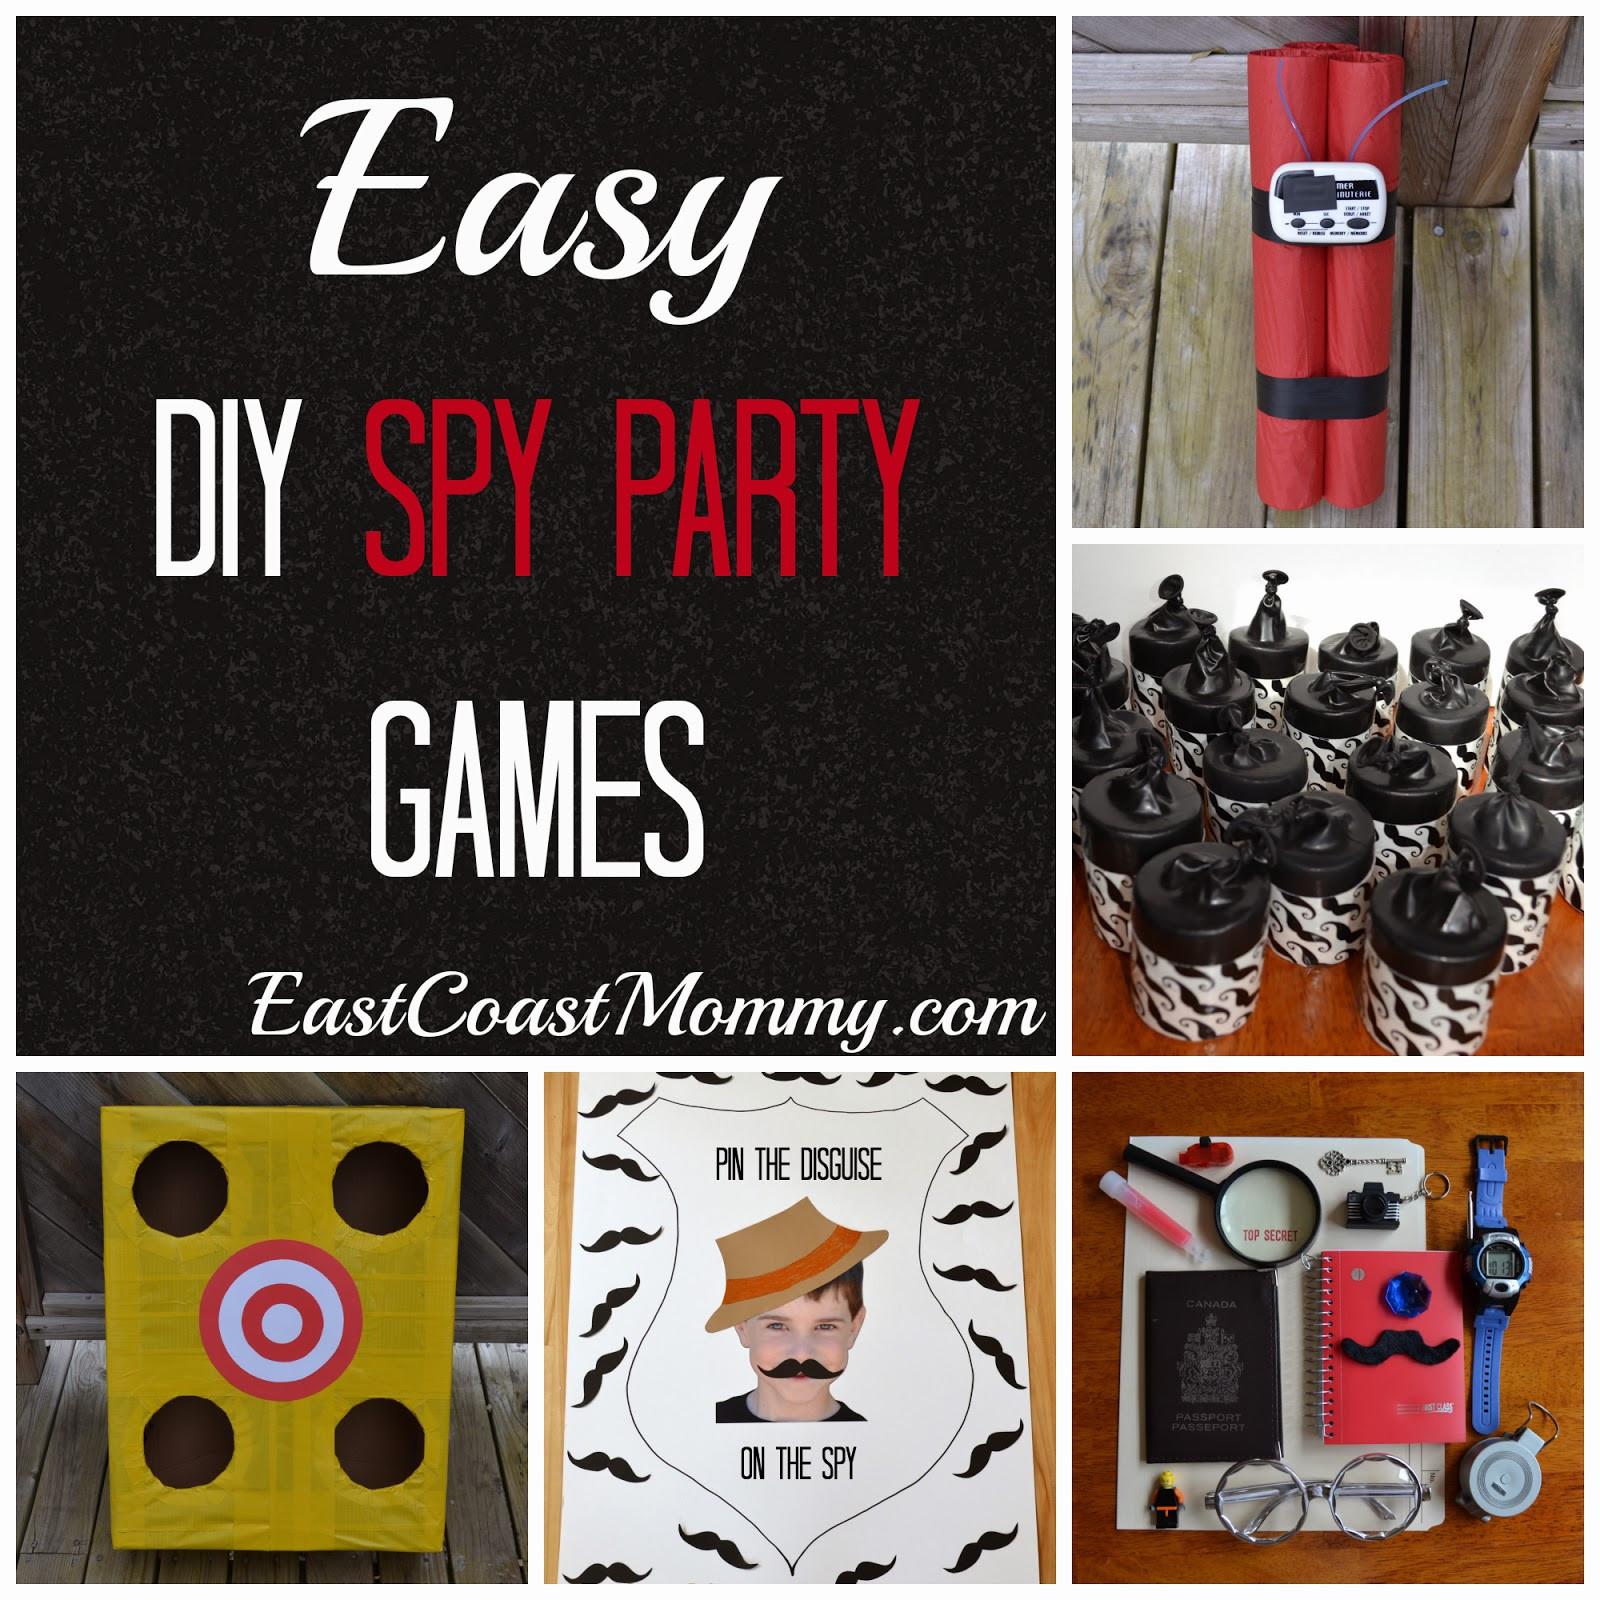 Spy Birthday Party Ideas
 East Coast Mommy DIY Spy Party 5 easy and inexpensive games